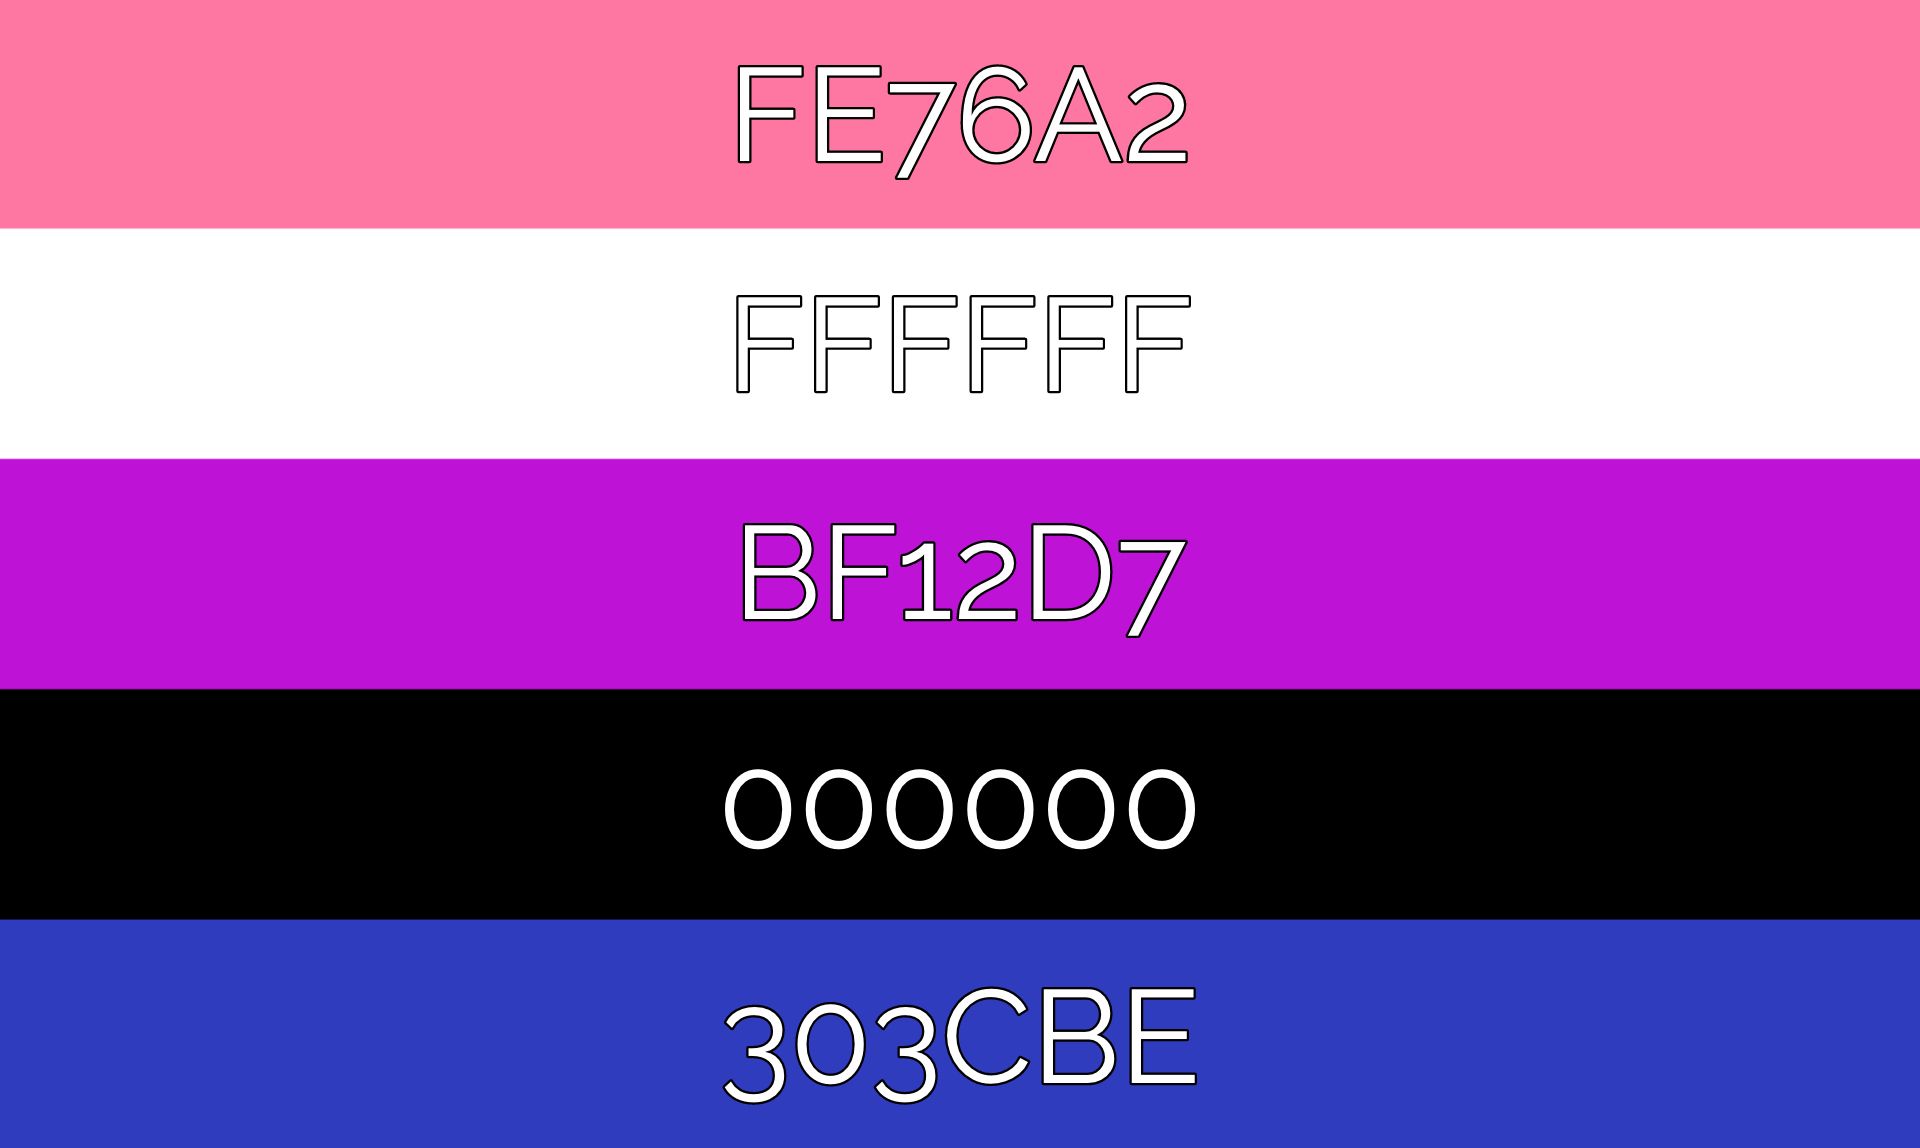 Official Pride Colors Exact Color Codes For Pride Flags